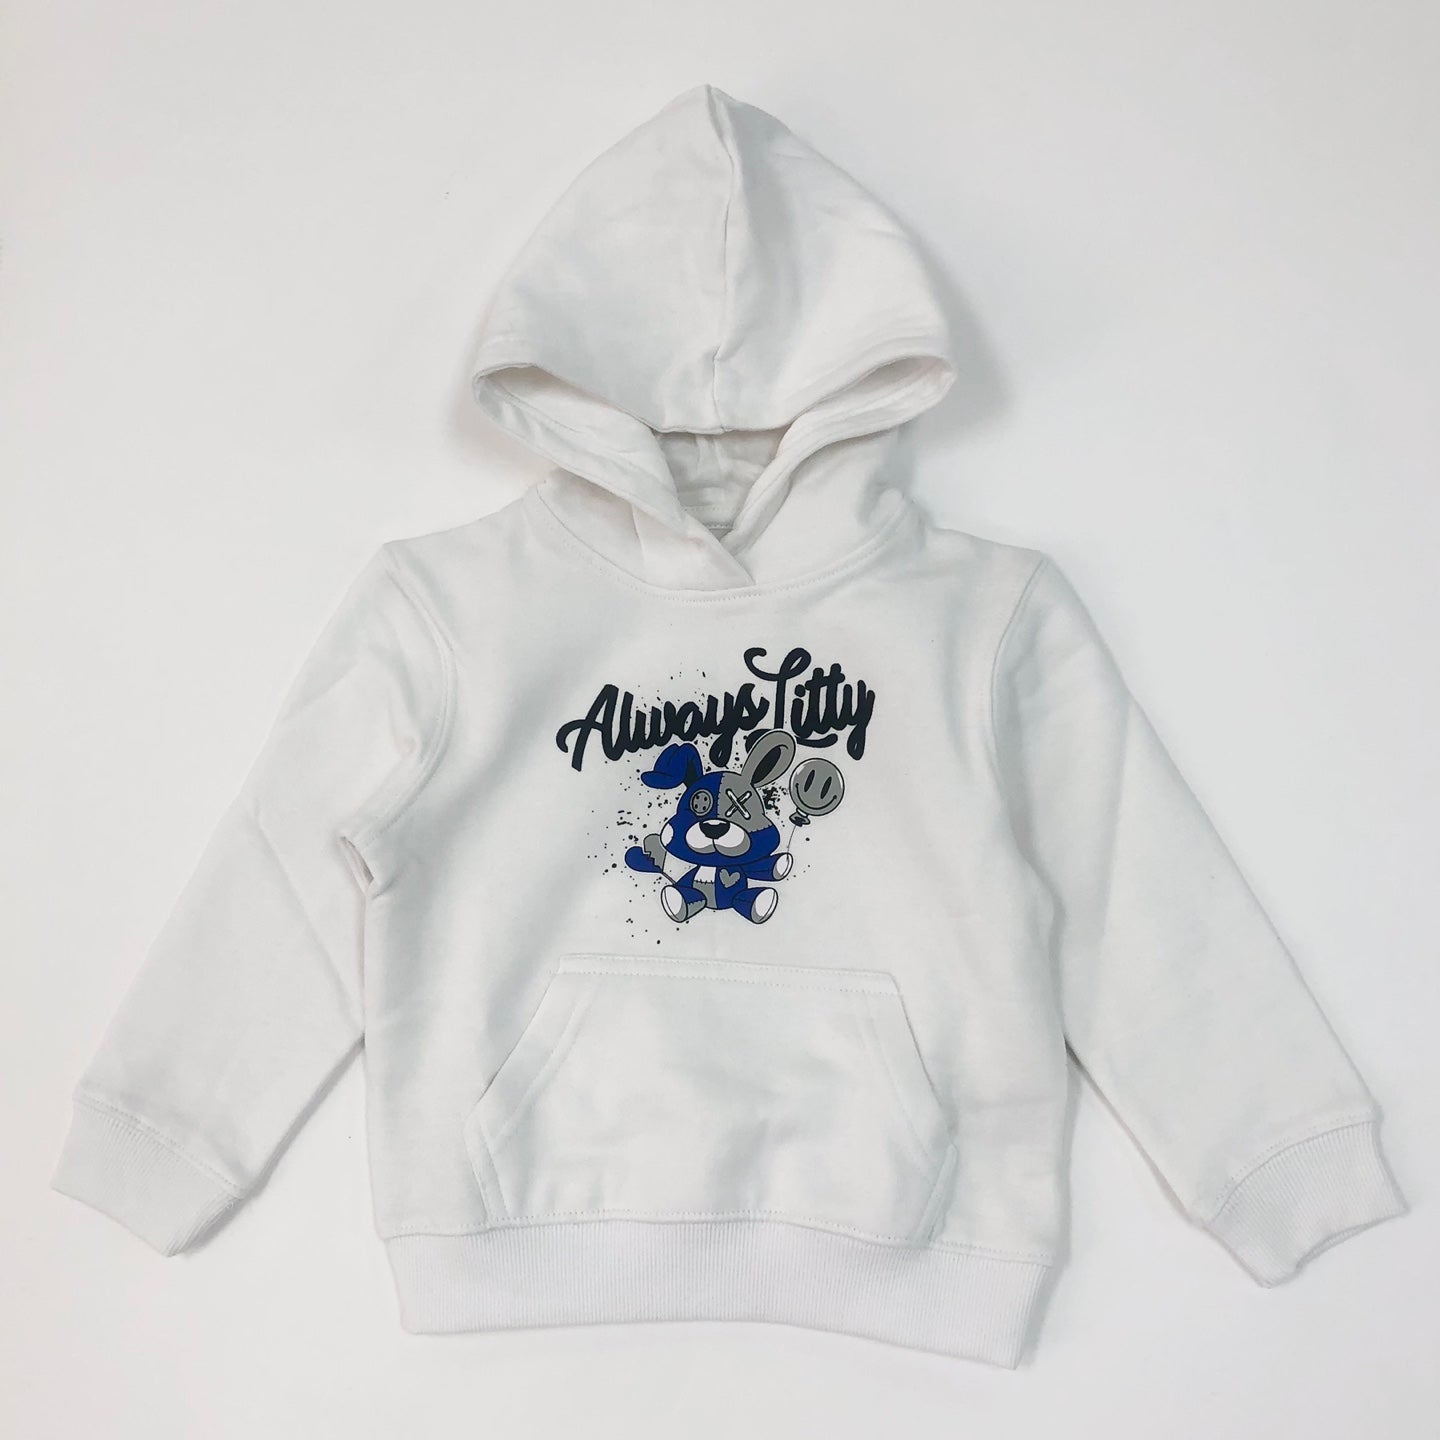 Premium Kid's Always Litty Graphic Pullover Hoodie - White/Royal Blue